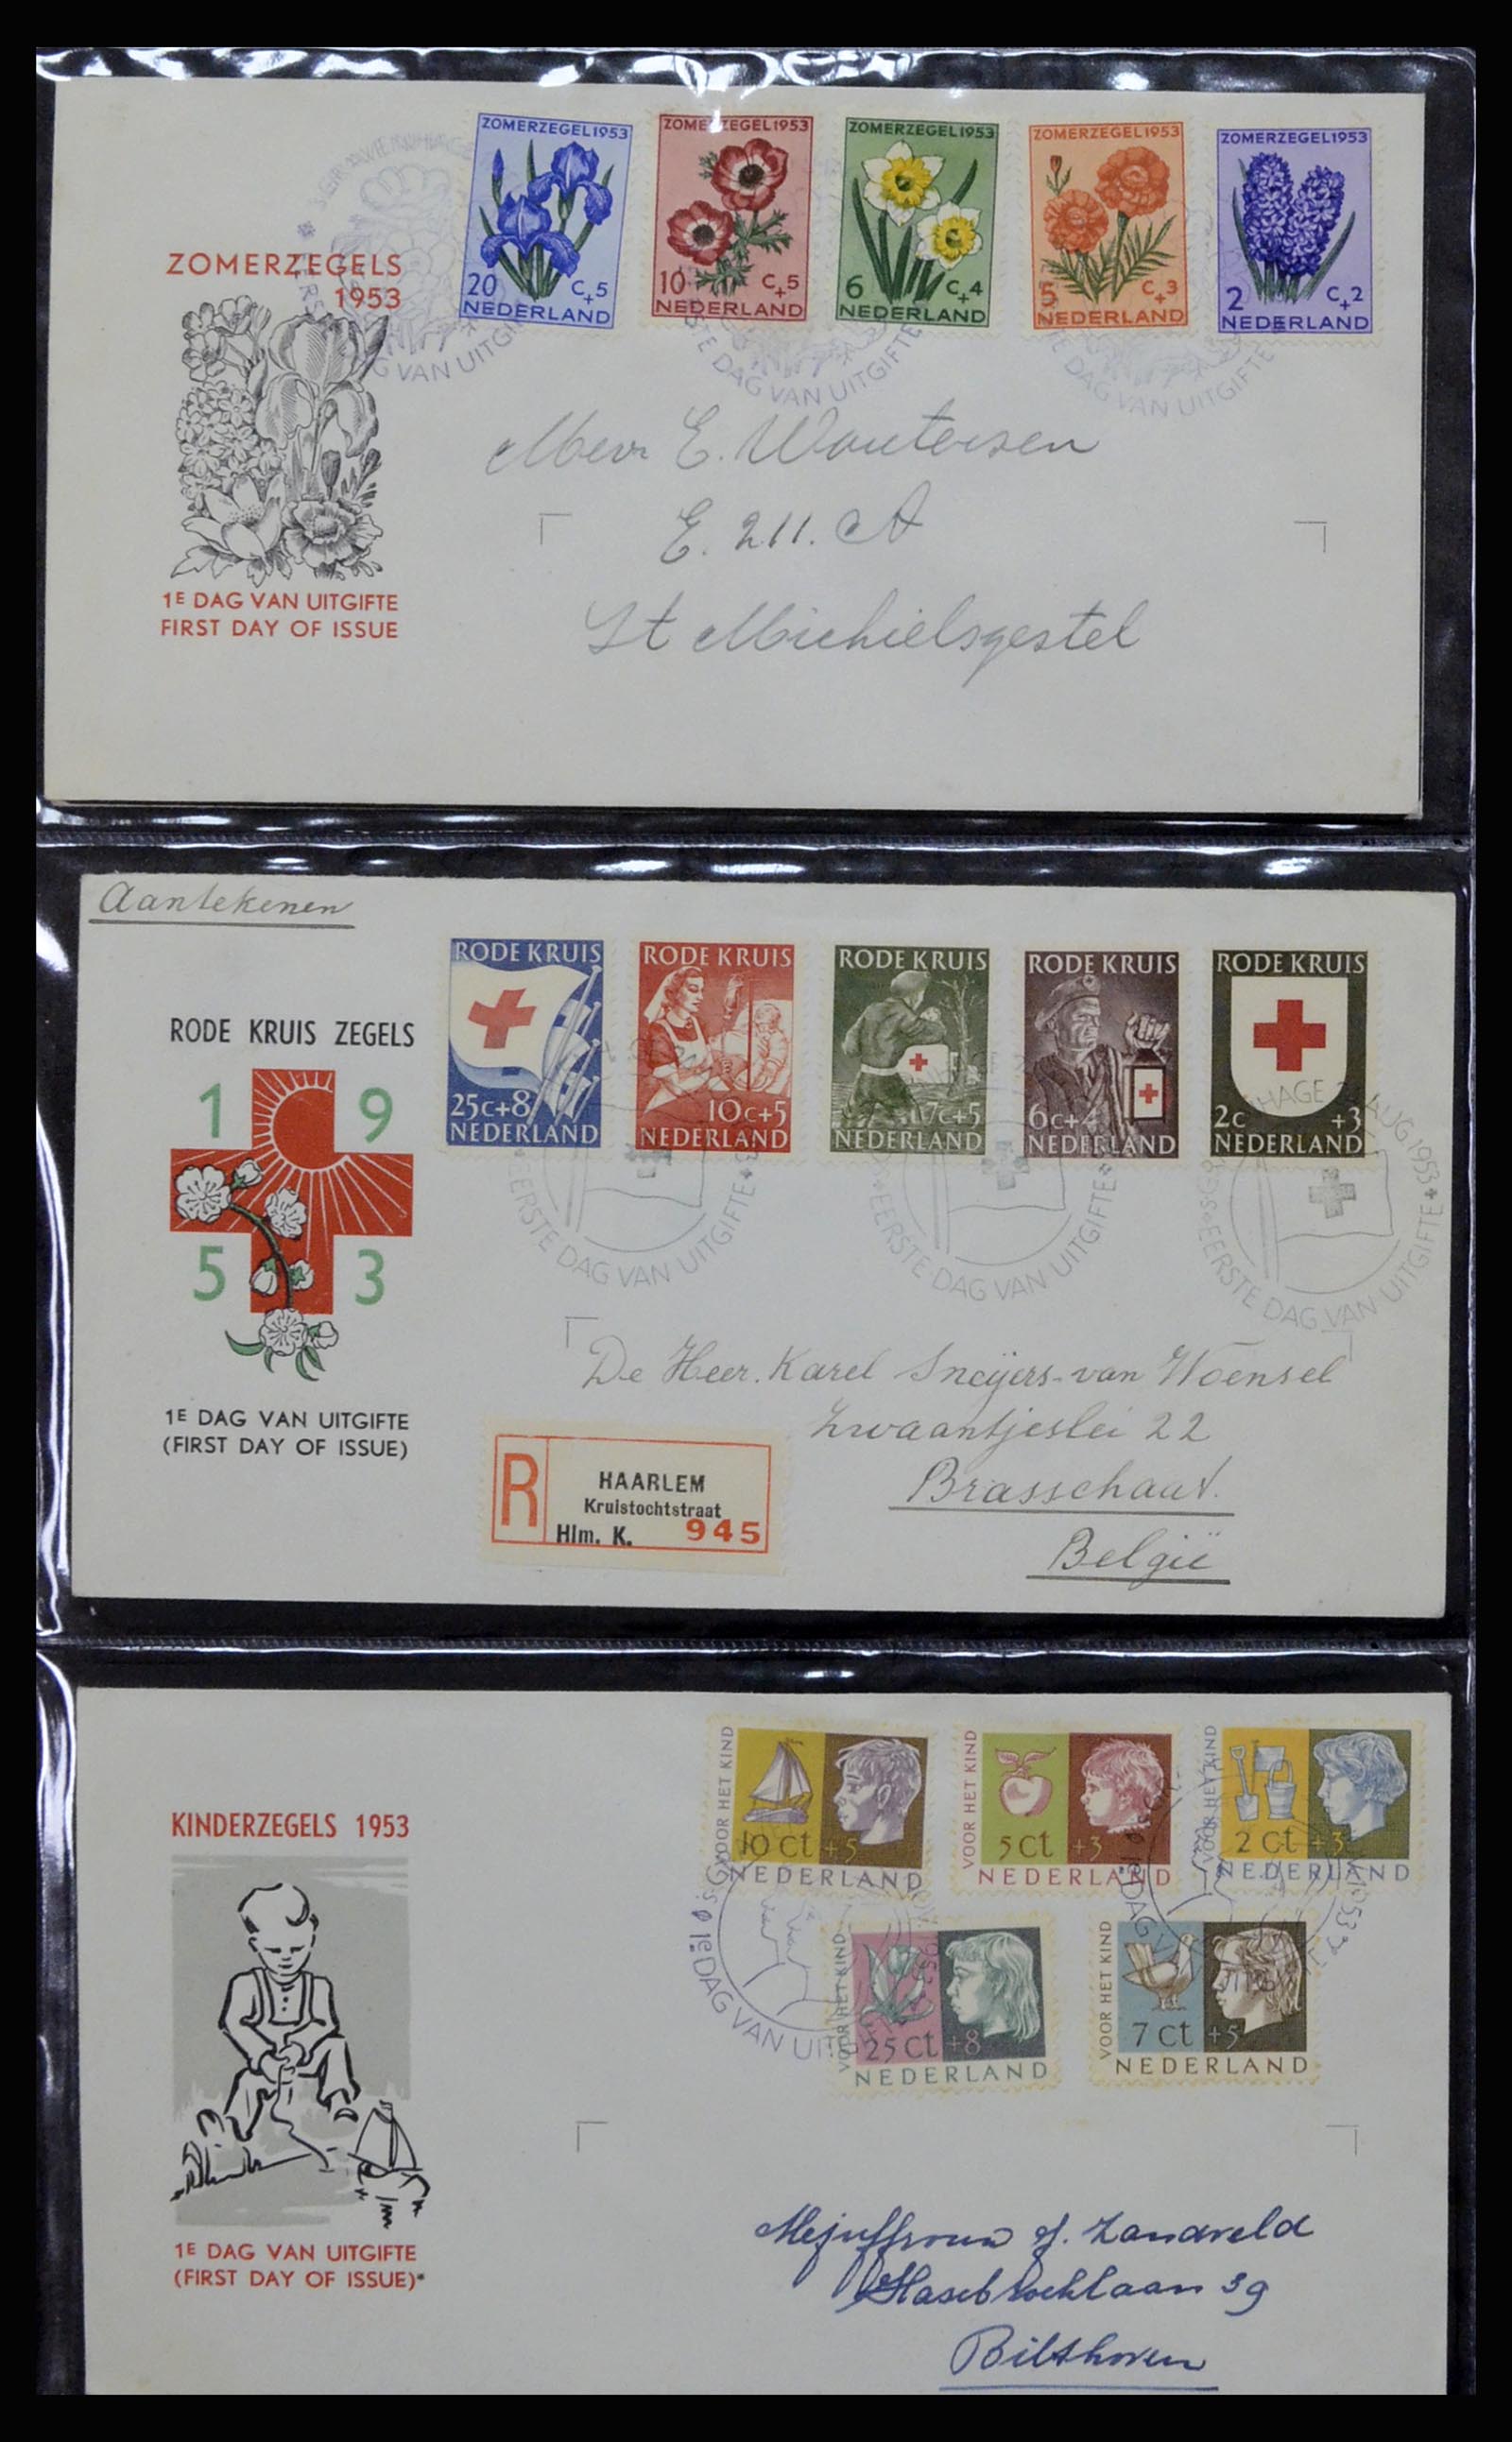 37197 006 - Stamp collection 37197 Netherlands FDC's 1950-2004.